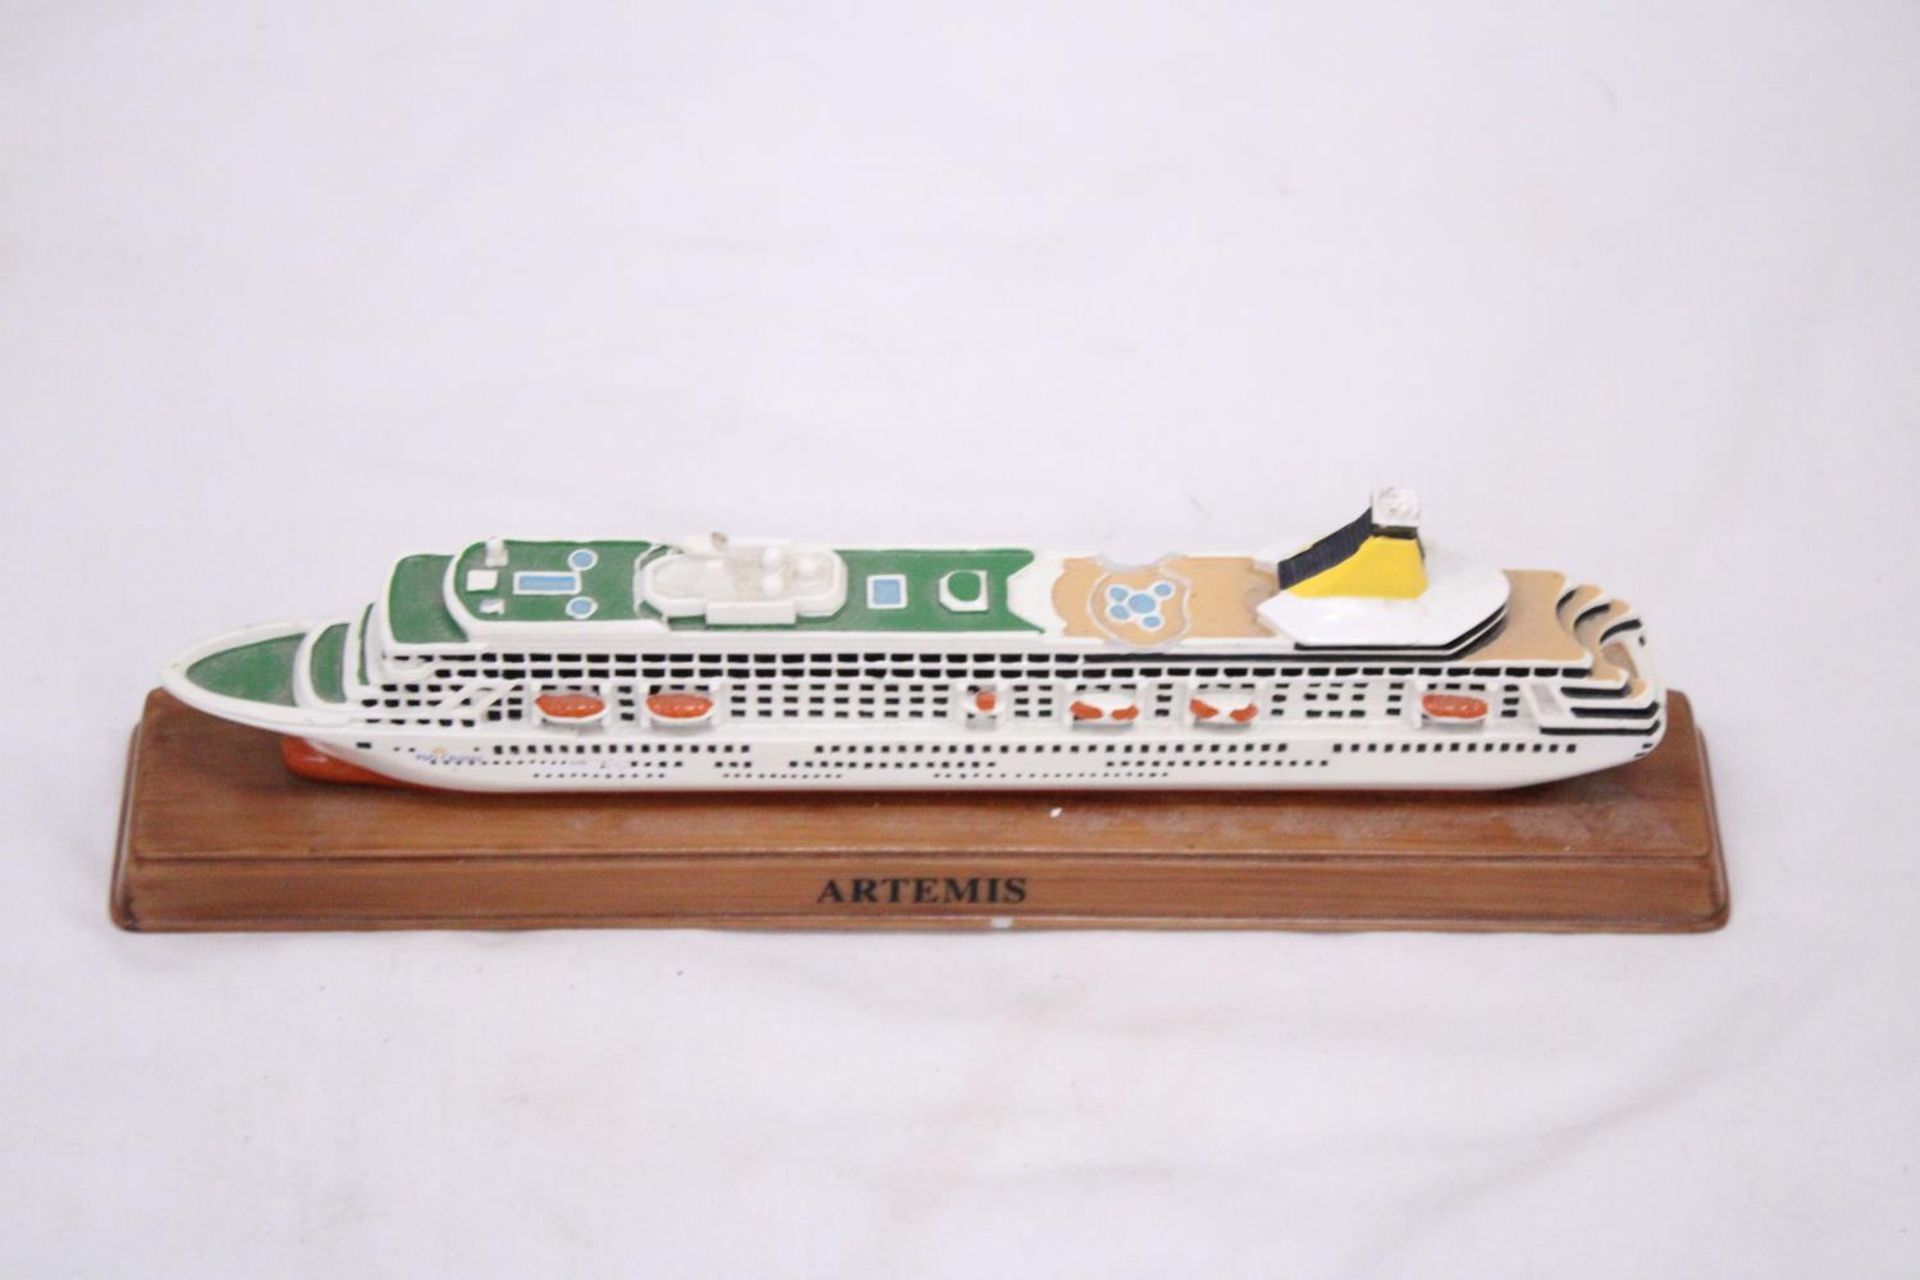 A HEAVY SOLID OCEAN LINER ON WOODEN STAND (ARTEMIS), LENGTH 26CM, HEIGHT 6CM - Image 6 of 6